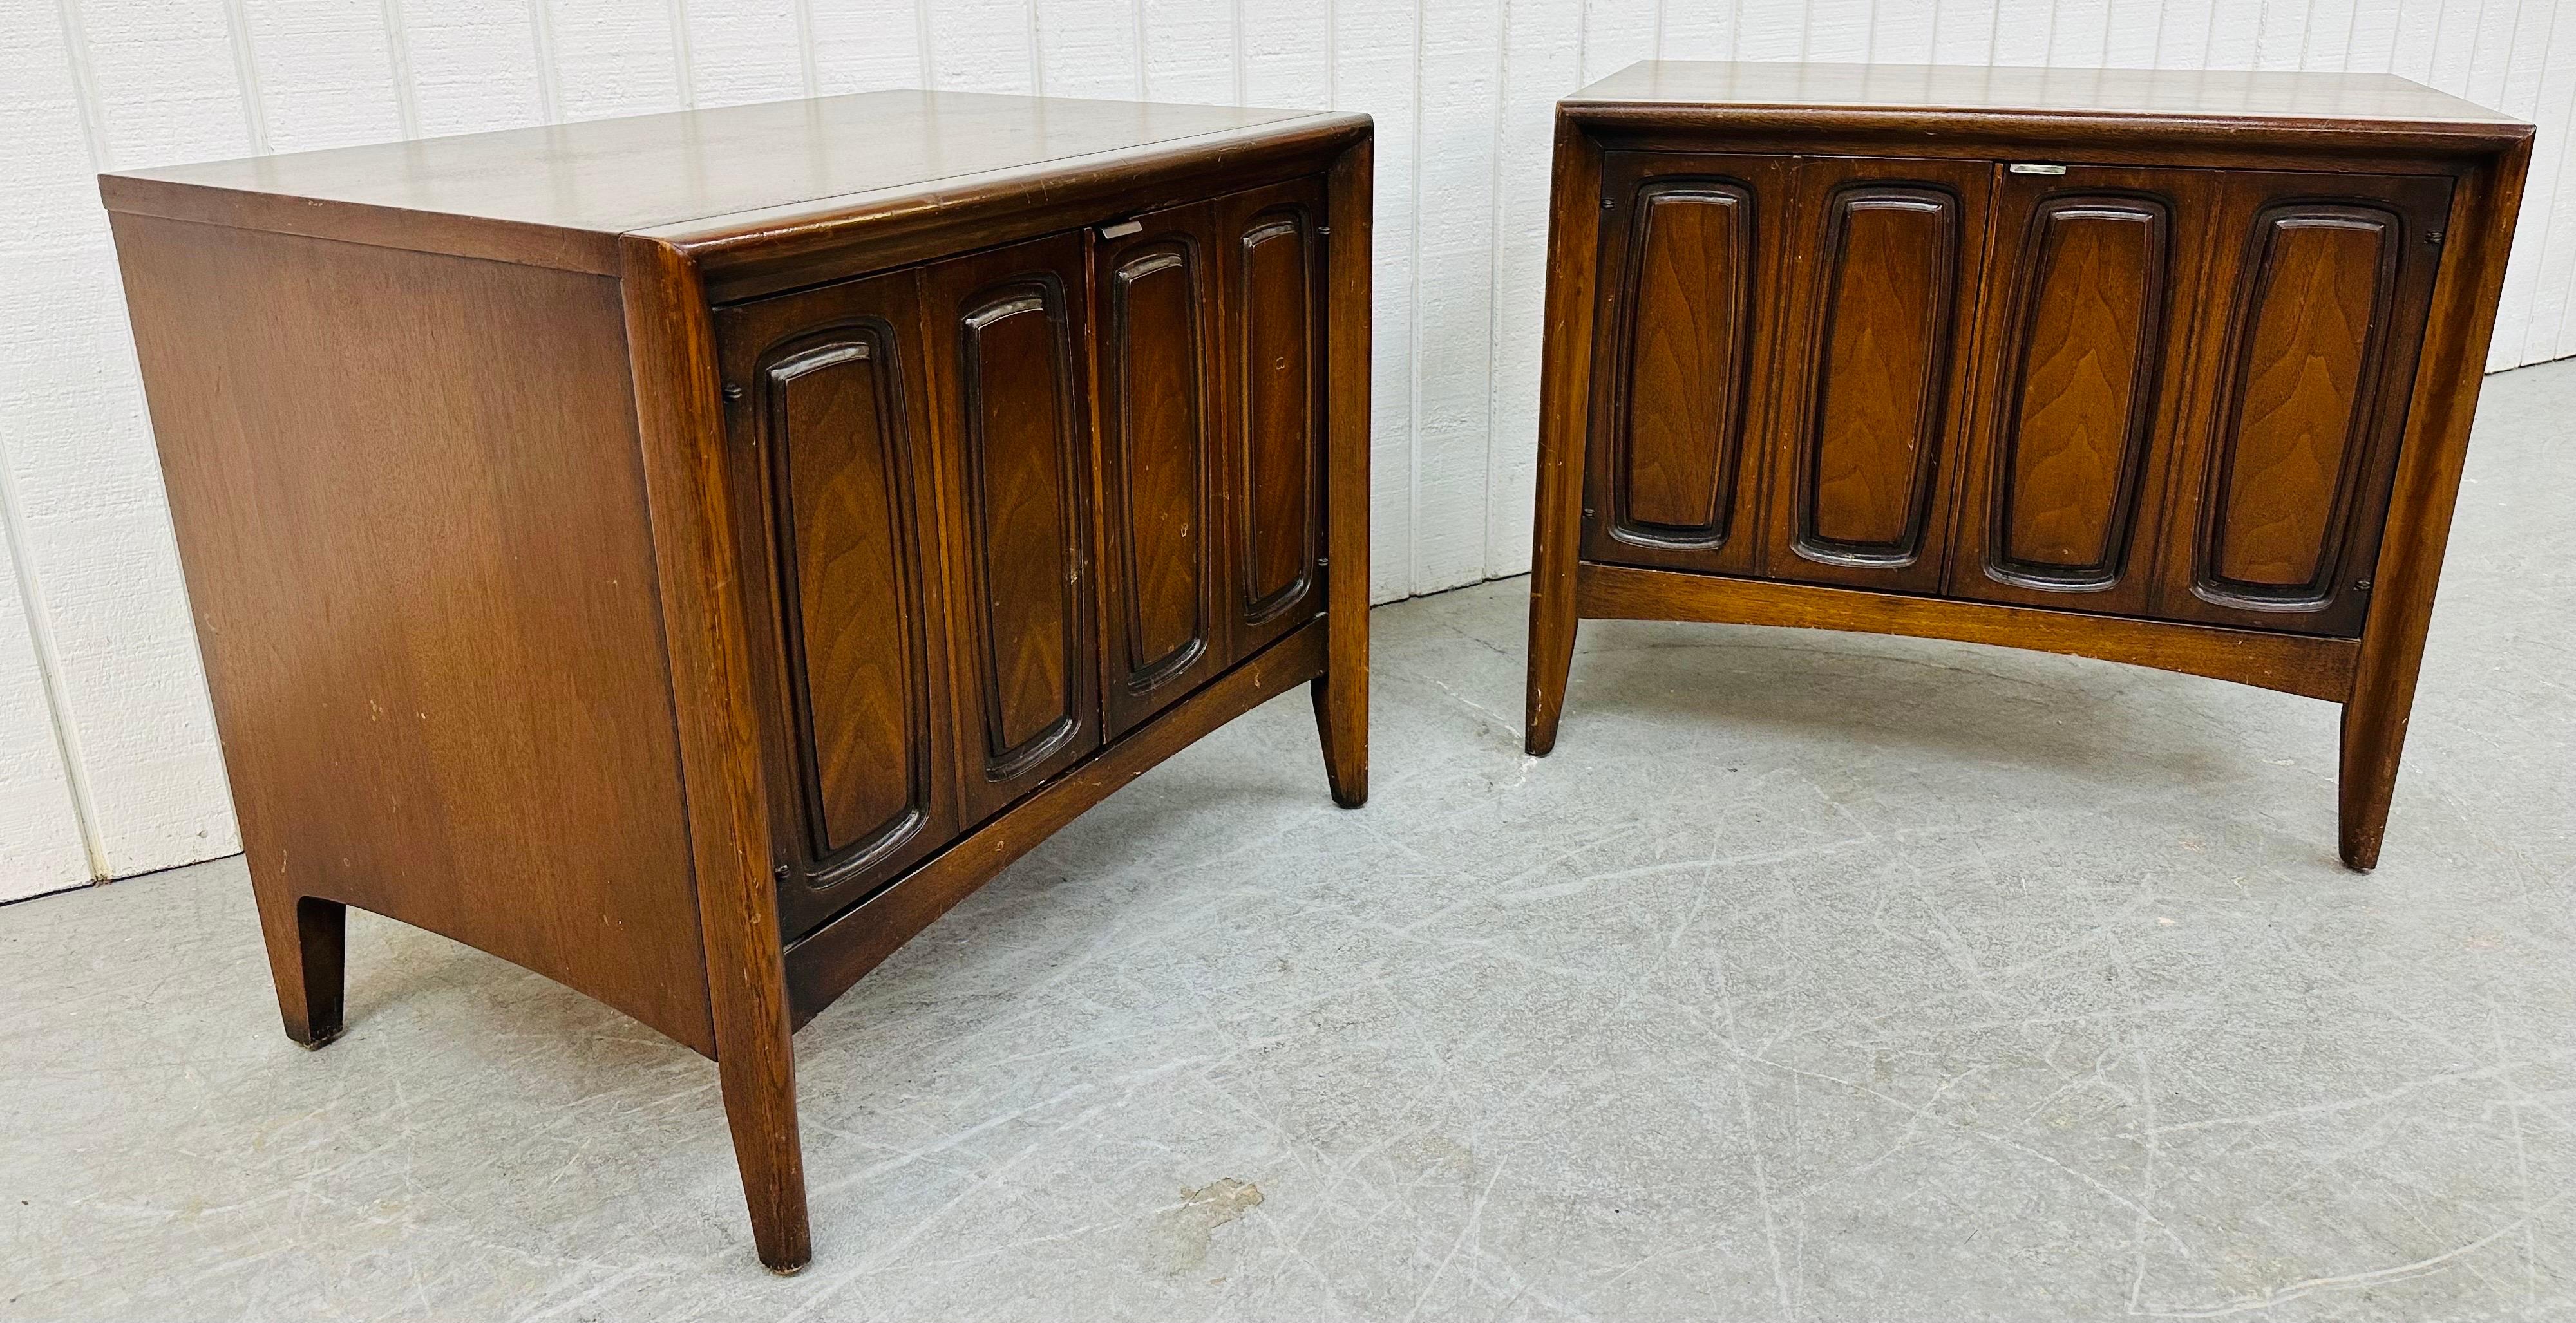 This listing is for a pair of Mid-Century Modern Broyhill Emphasis Walnut Nightstands. Featuring a straight line design, two doors with the iconic Emphasis design, interior storage space, modern legs, and a dark walnut finish. This is an exceptional